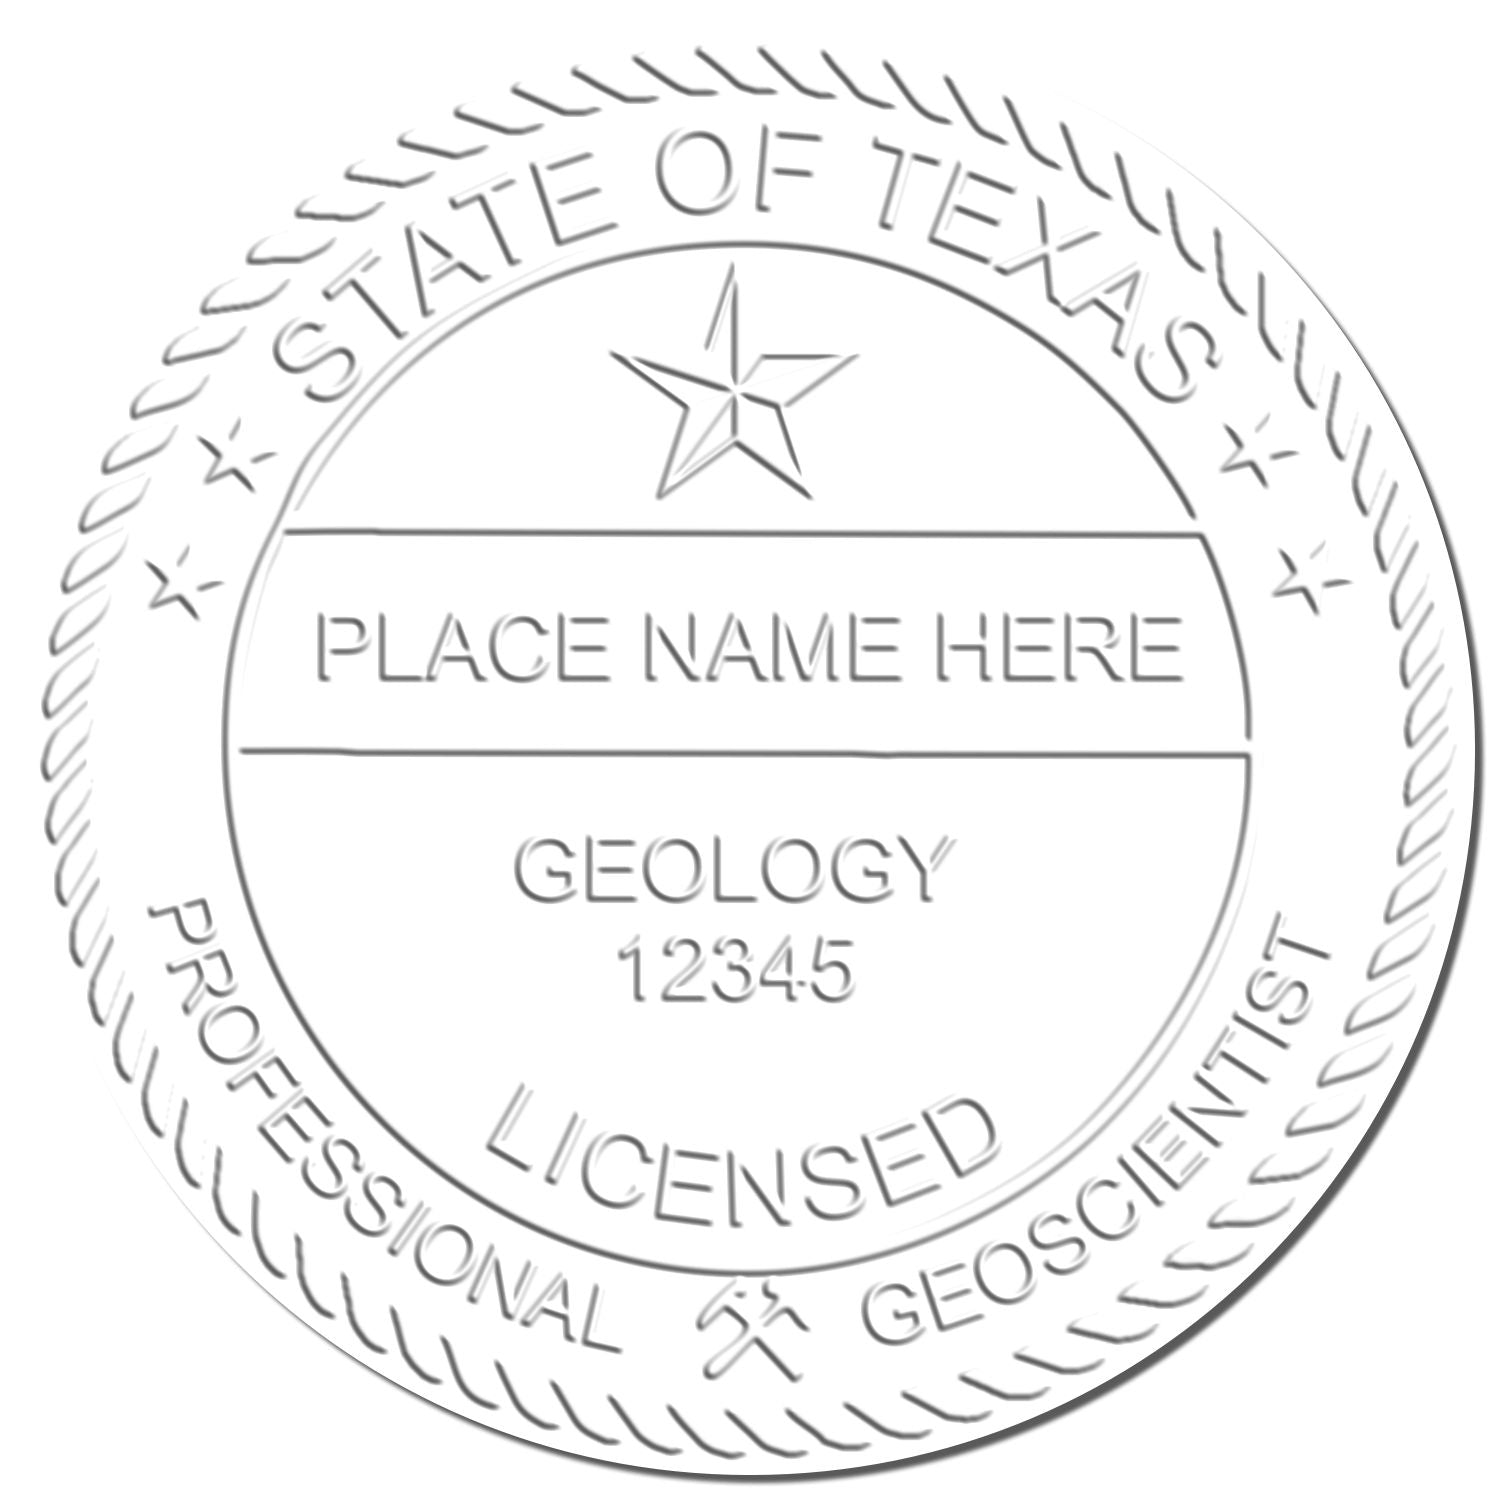 The main image for the Texas Geologist Desk Seal depicting a sample of the imprint and imprint sample